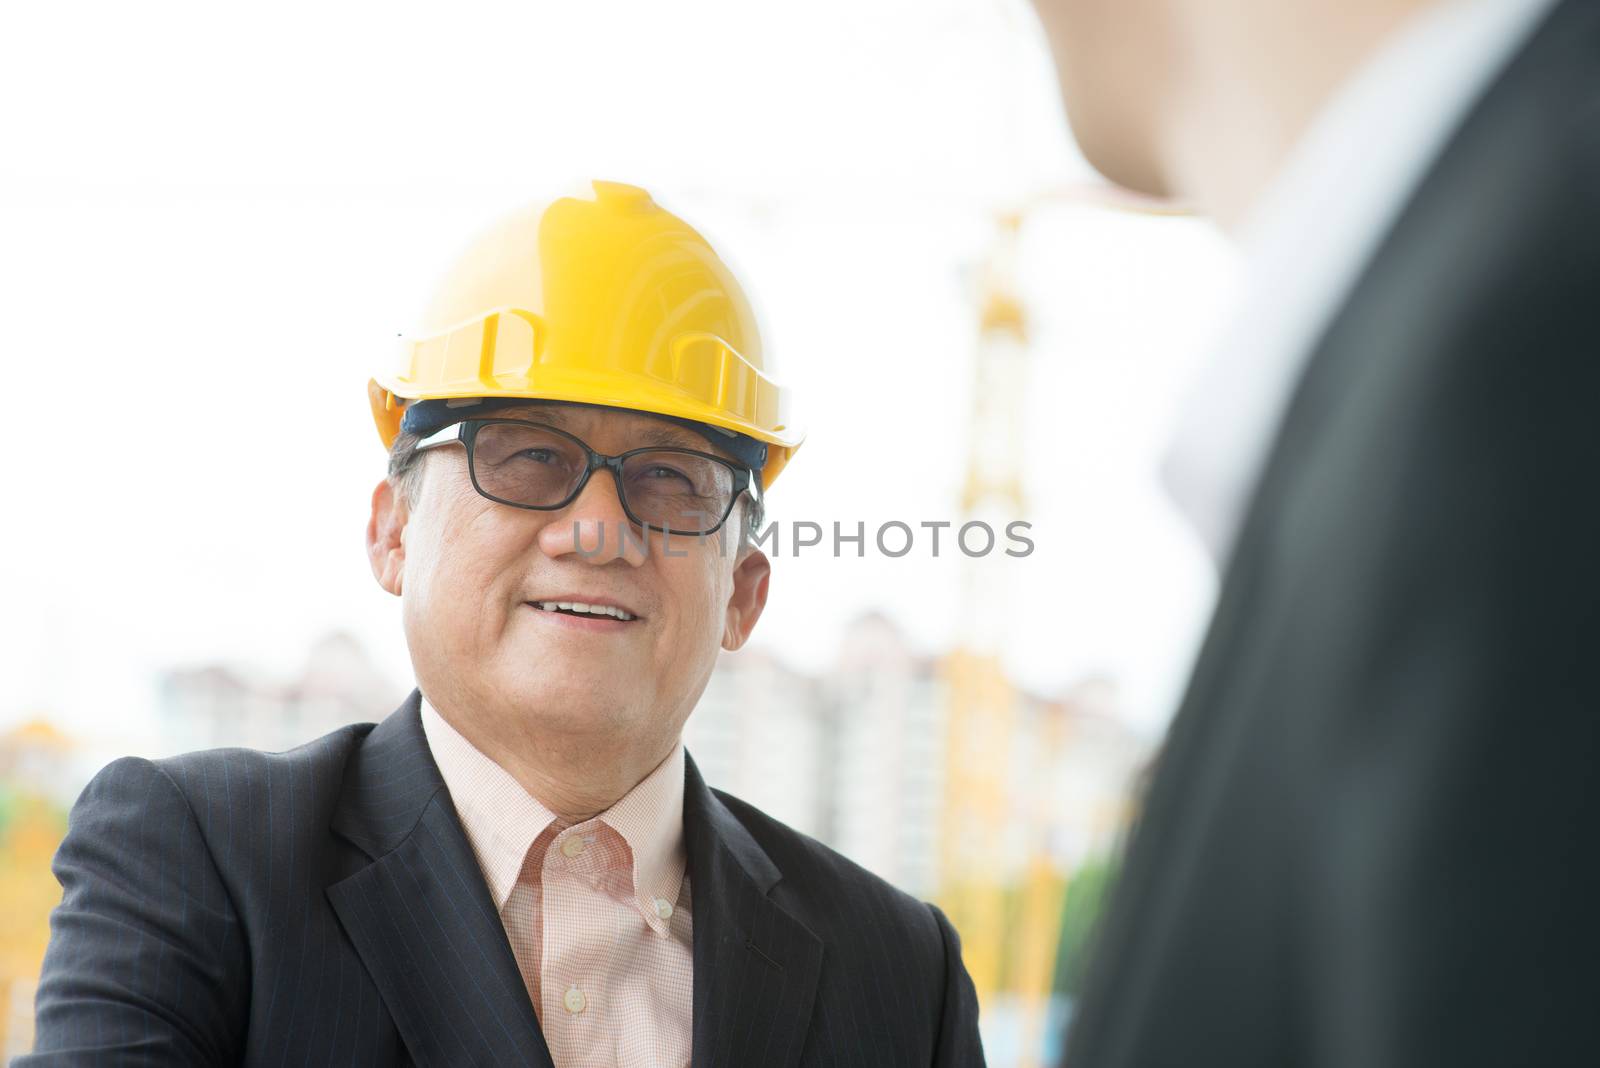 Senior male architect inspecting site with team member, construction site as background.